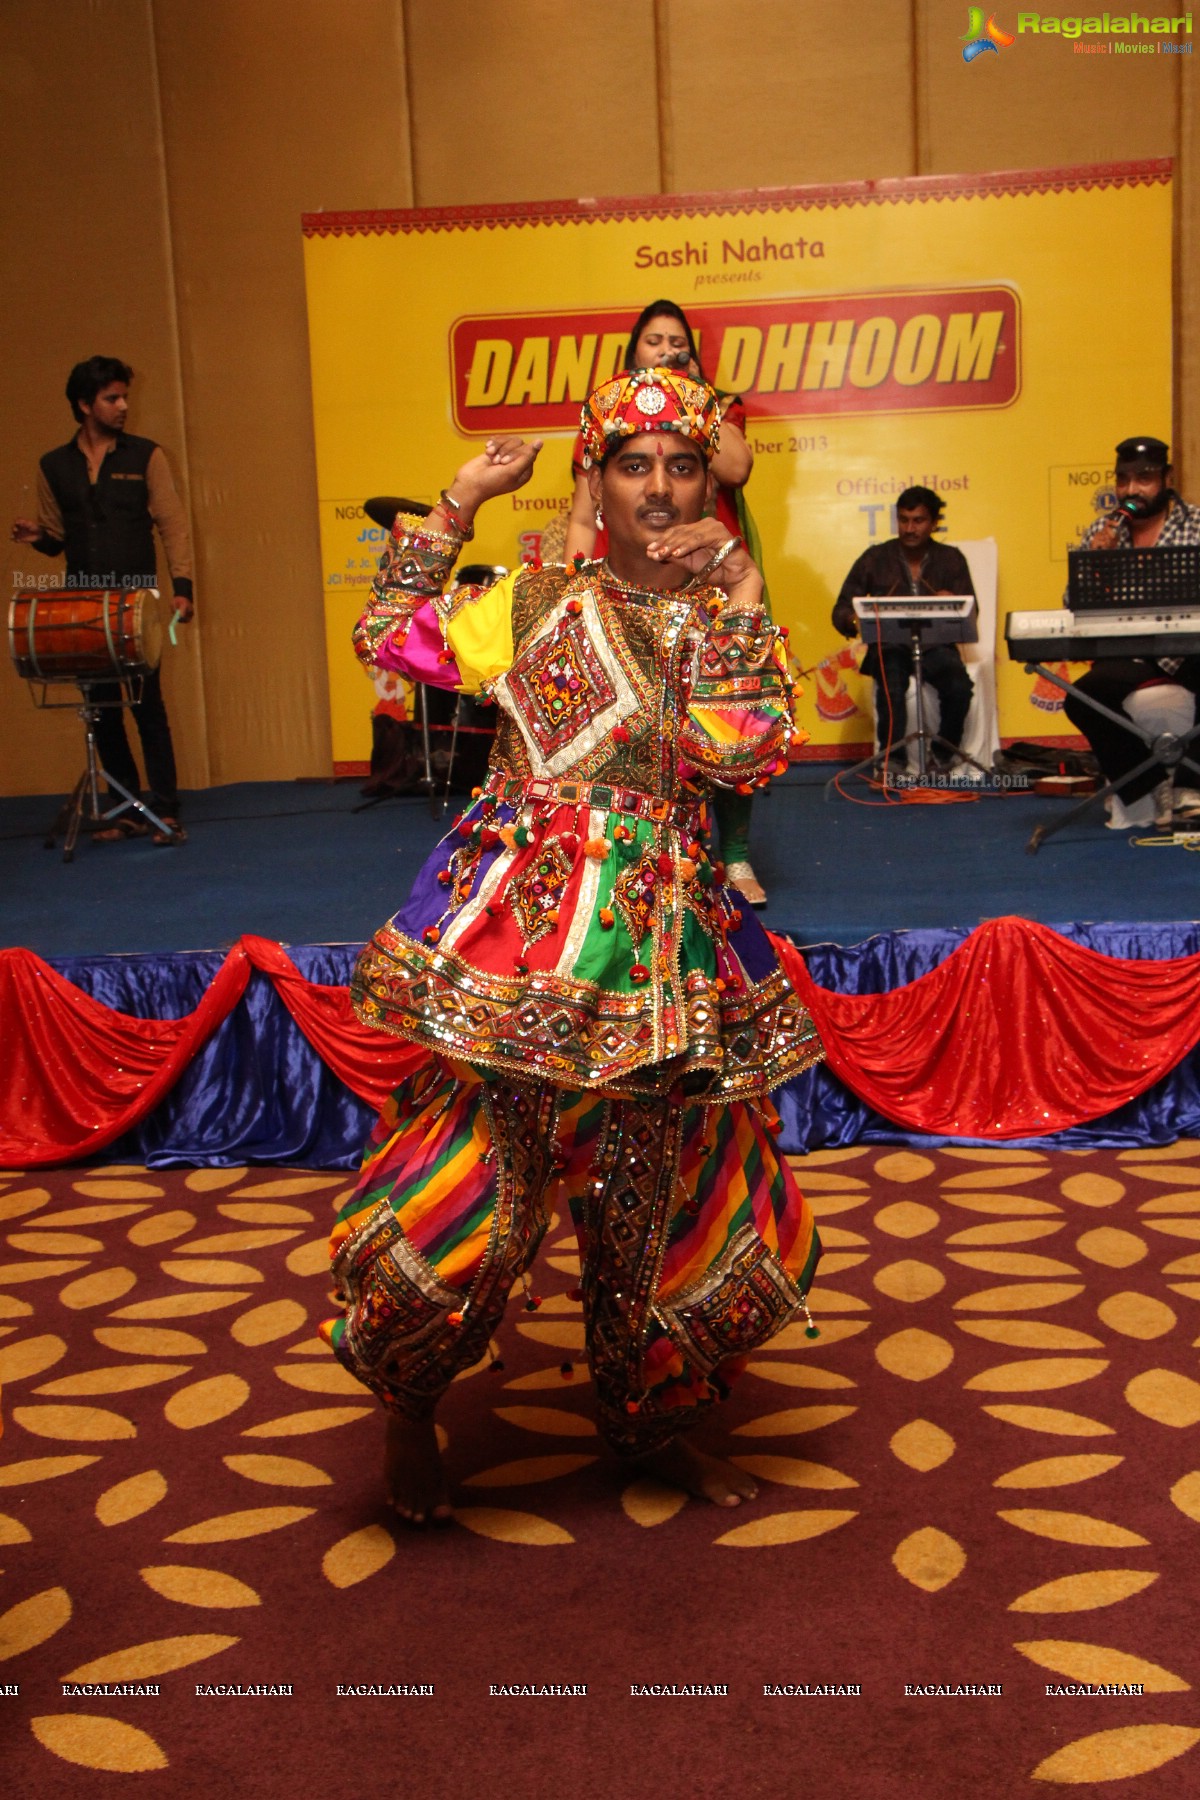 Akritti Elite Exhibitions 'Dandia Dhhoom' at The Park, Hyderabad